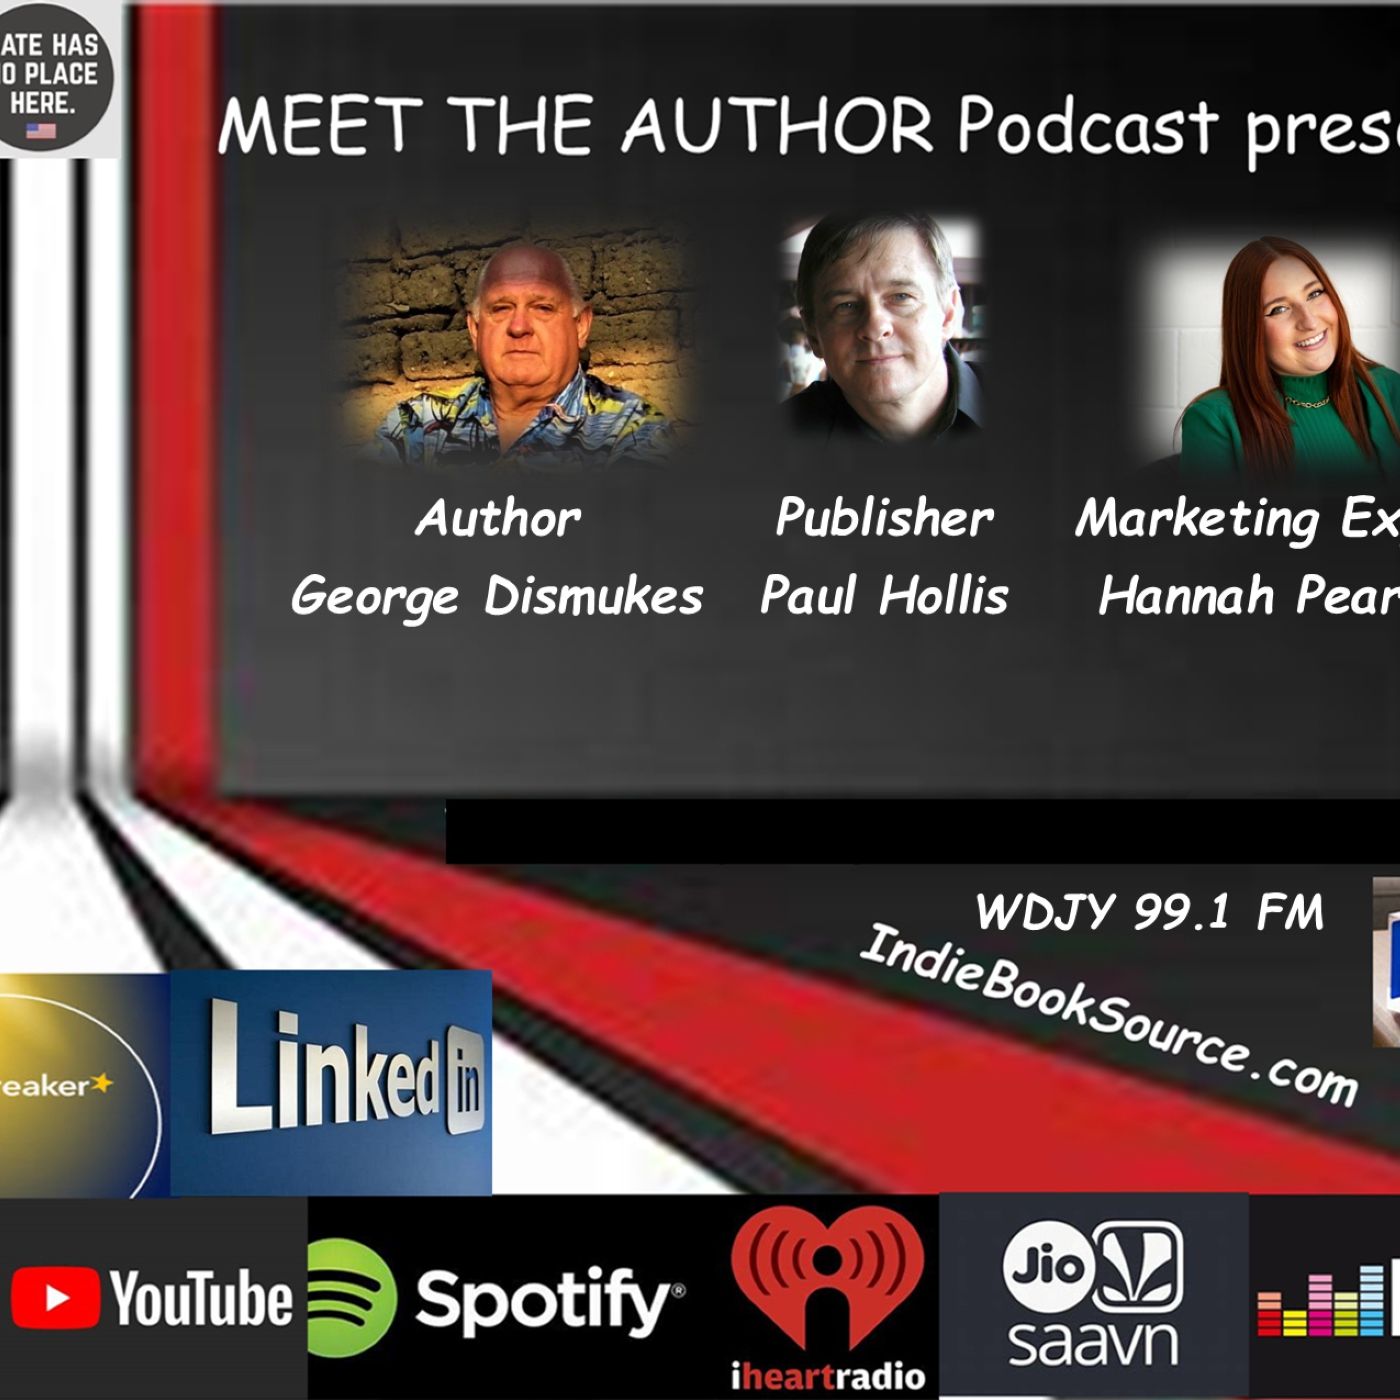 MEET THE AUTHOR Podcast_ LIVE - Episode 135 - DISMUKES, HOLLIS, PEARSON